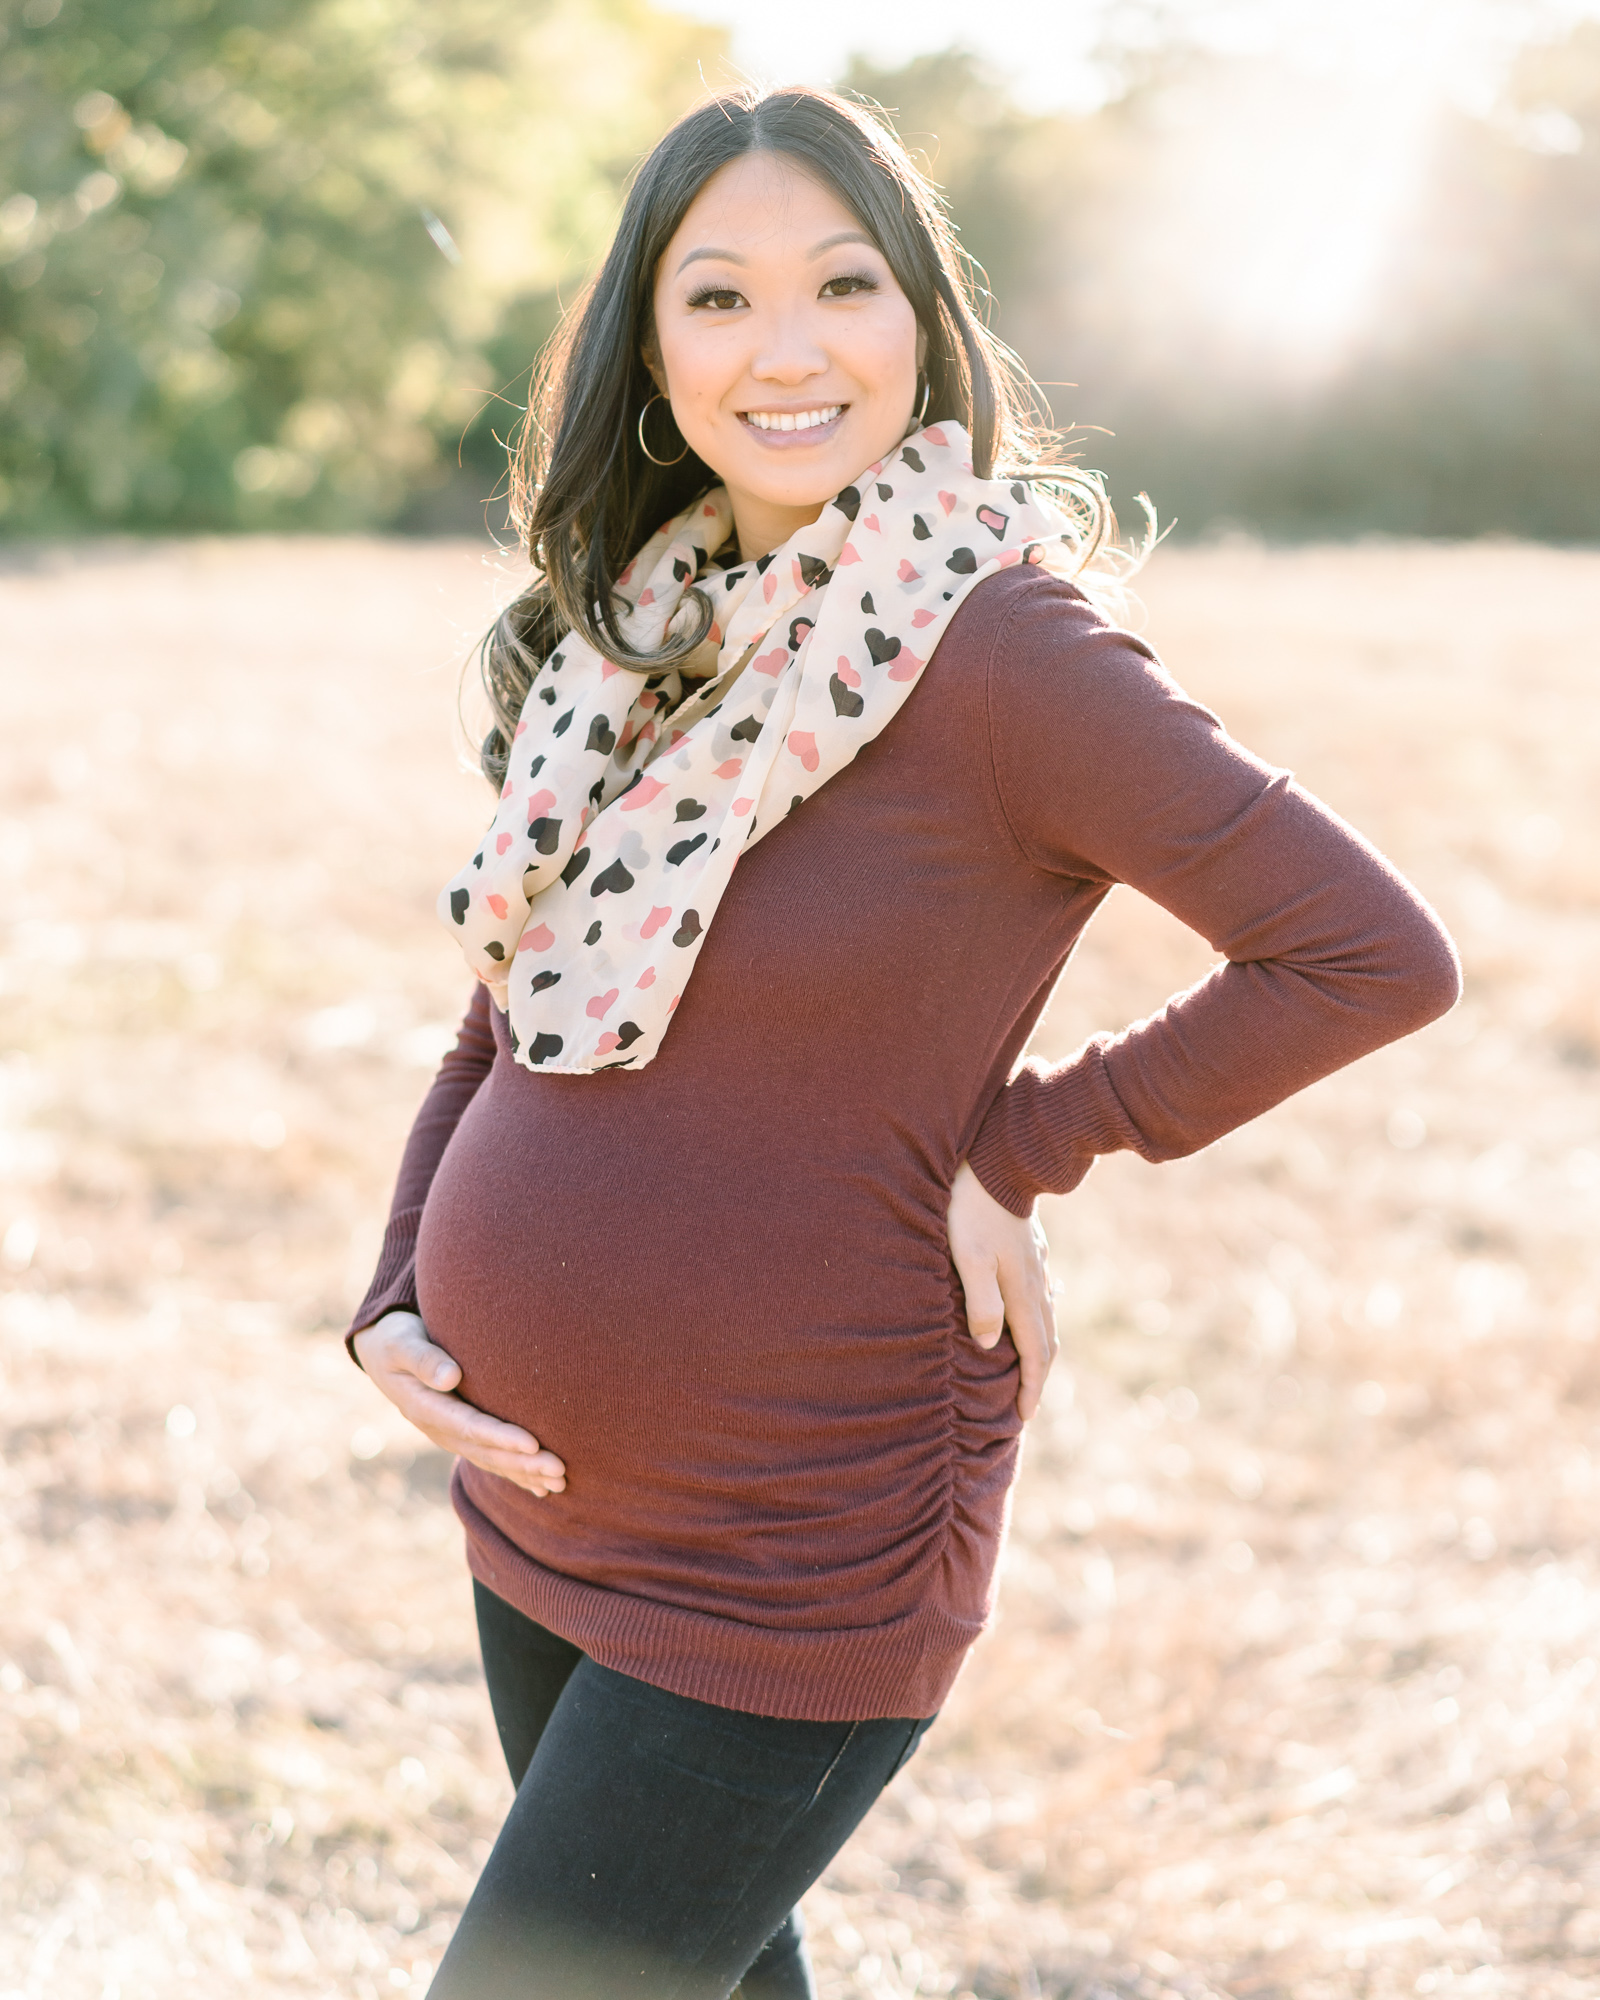 Pregnant woman holding her belly and smiling